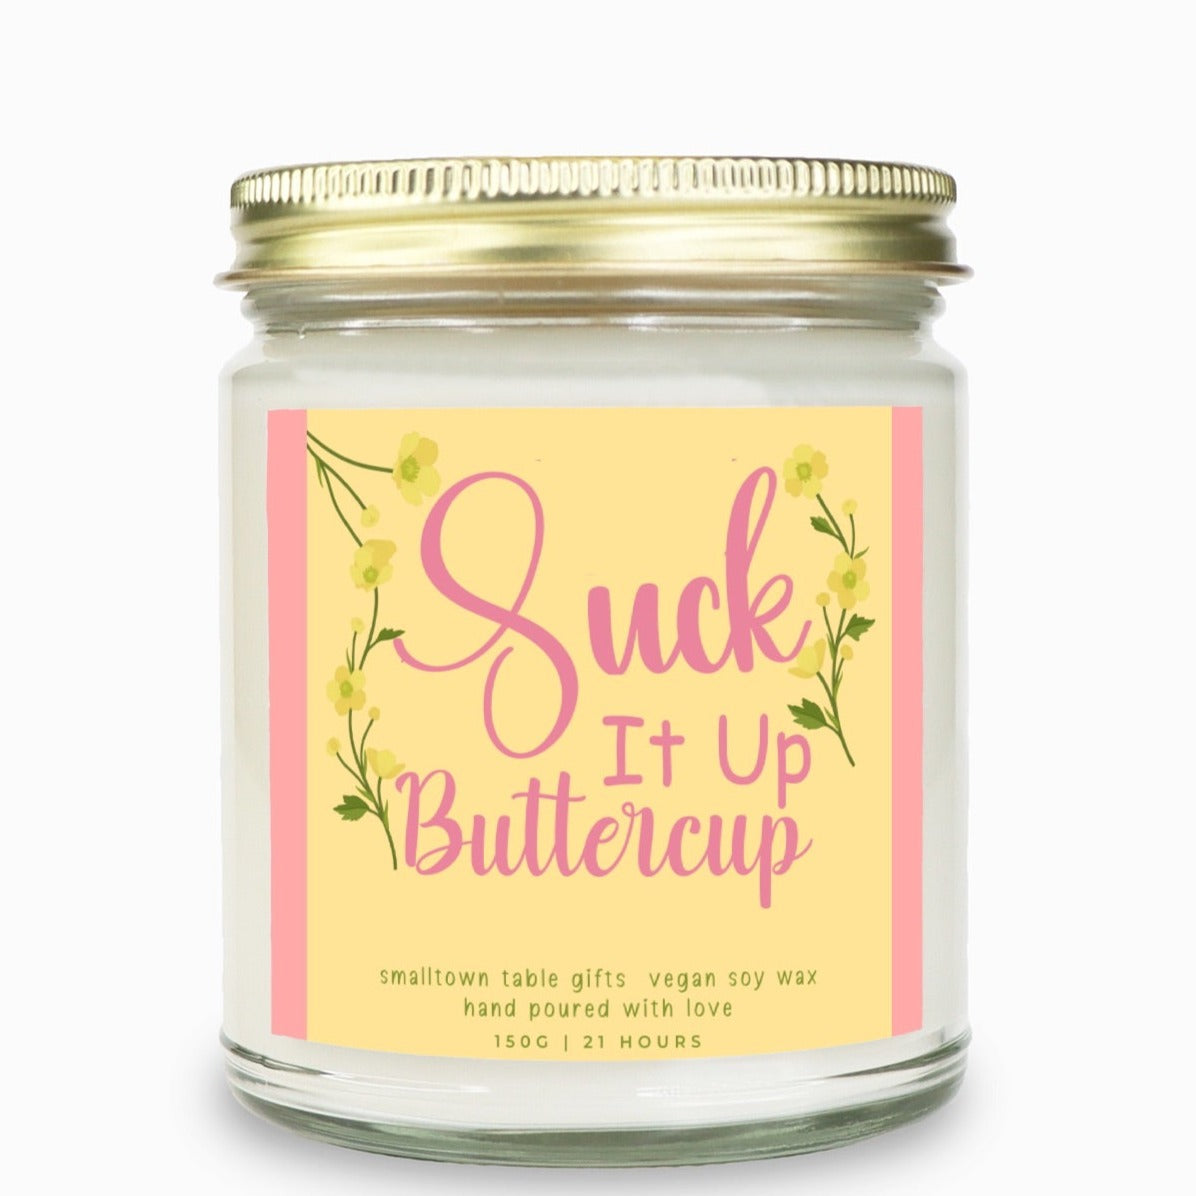 clean glass candle with gold lid label is pink on side, yellow background that says Suck it up buttercup yellow flowers with greens around the words